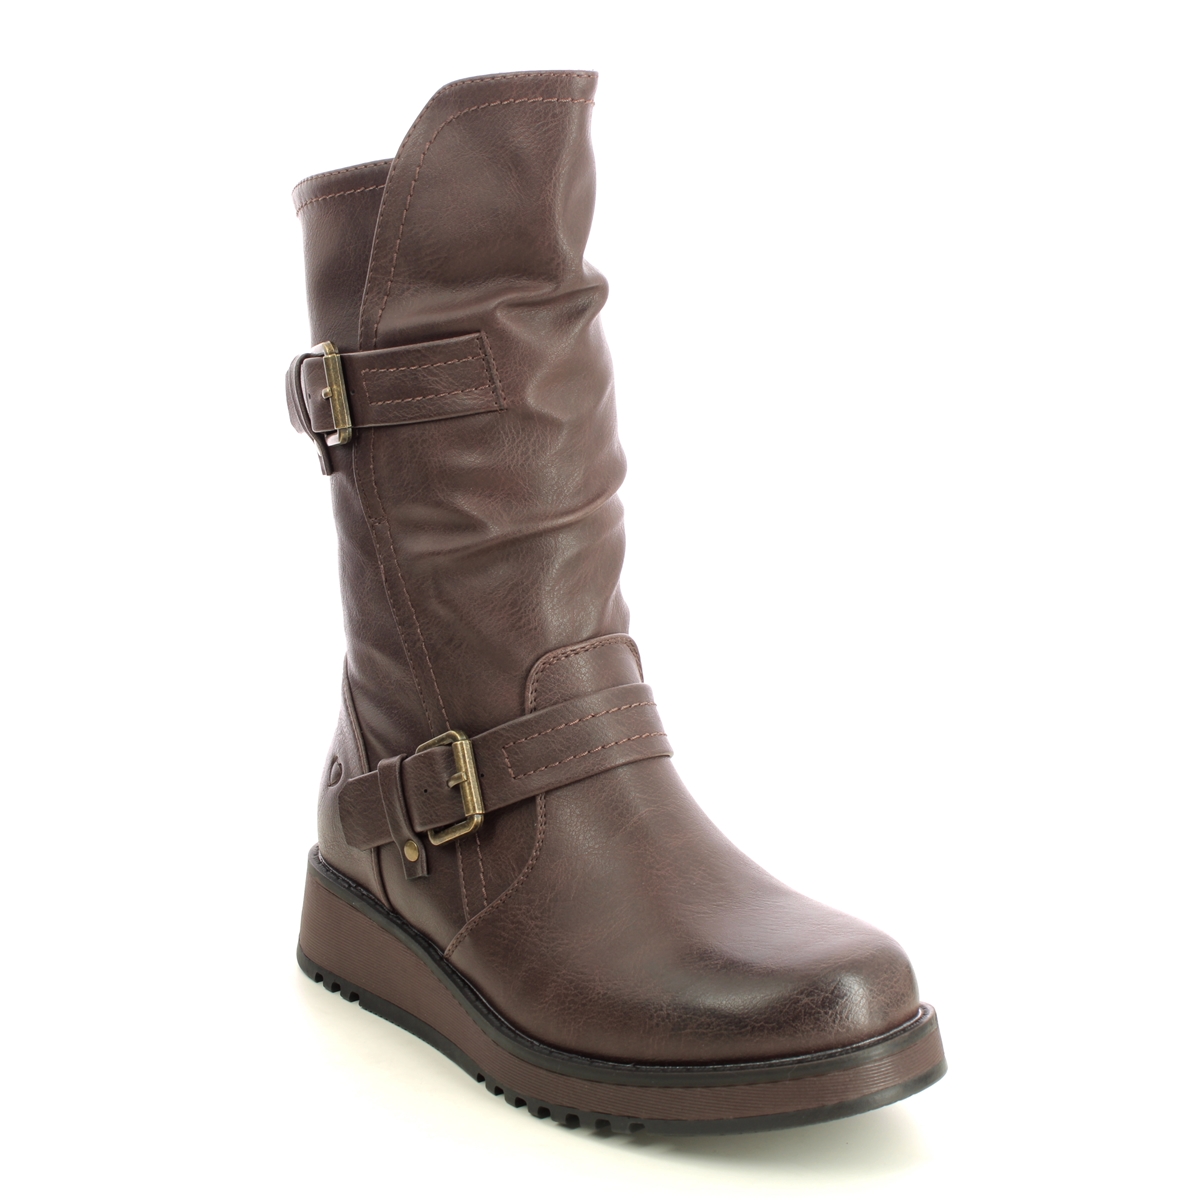 Heavenly Feet Hannah 4 Chocolate Brown Womens Mid Calf Boots 3507-27 In Size 7 In Plain Chocolate Brown